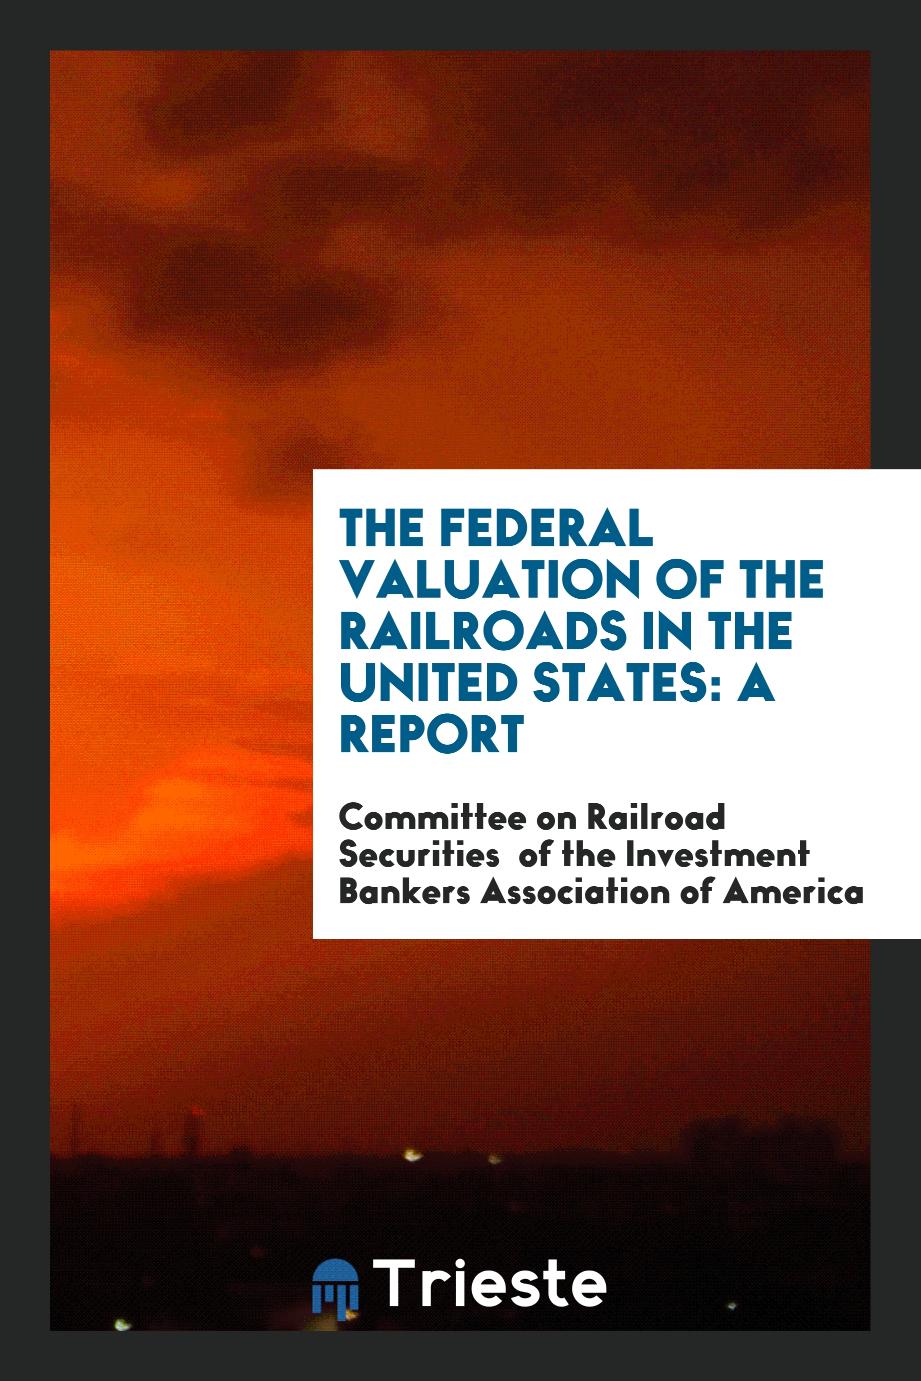 The Federal Valuation of the Railroads in the United States: a report